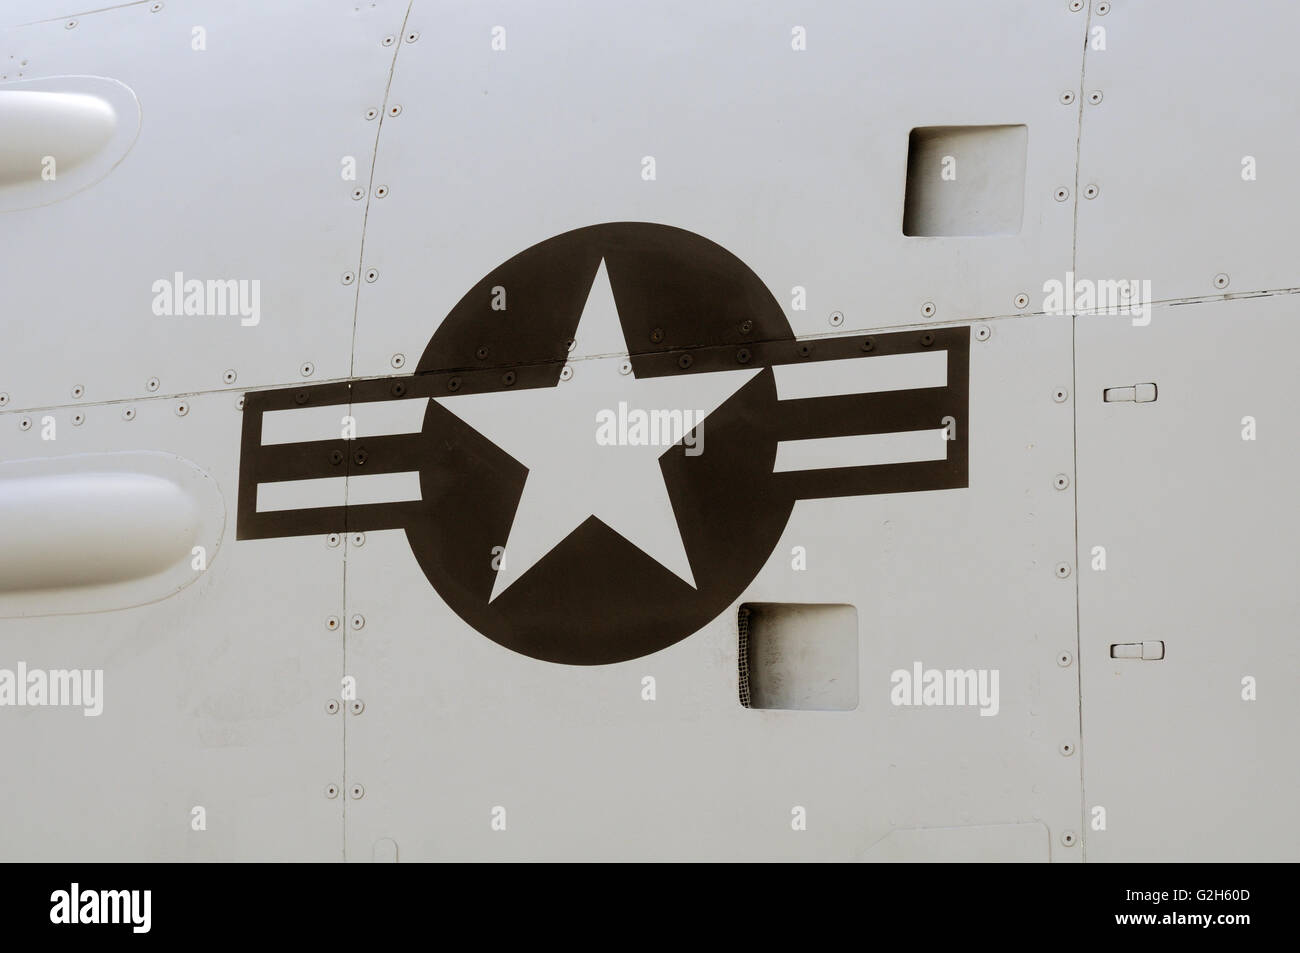 USA AIr Force logo on the side of an A10 Warthog airplane Stock Photo: 104869421 - Alamy1300 x 953